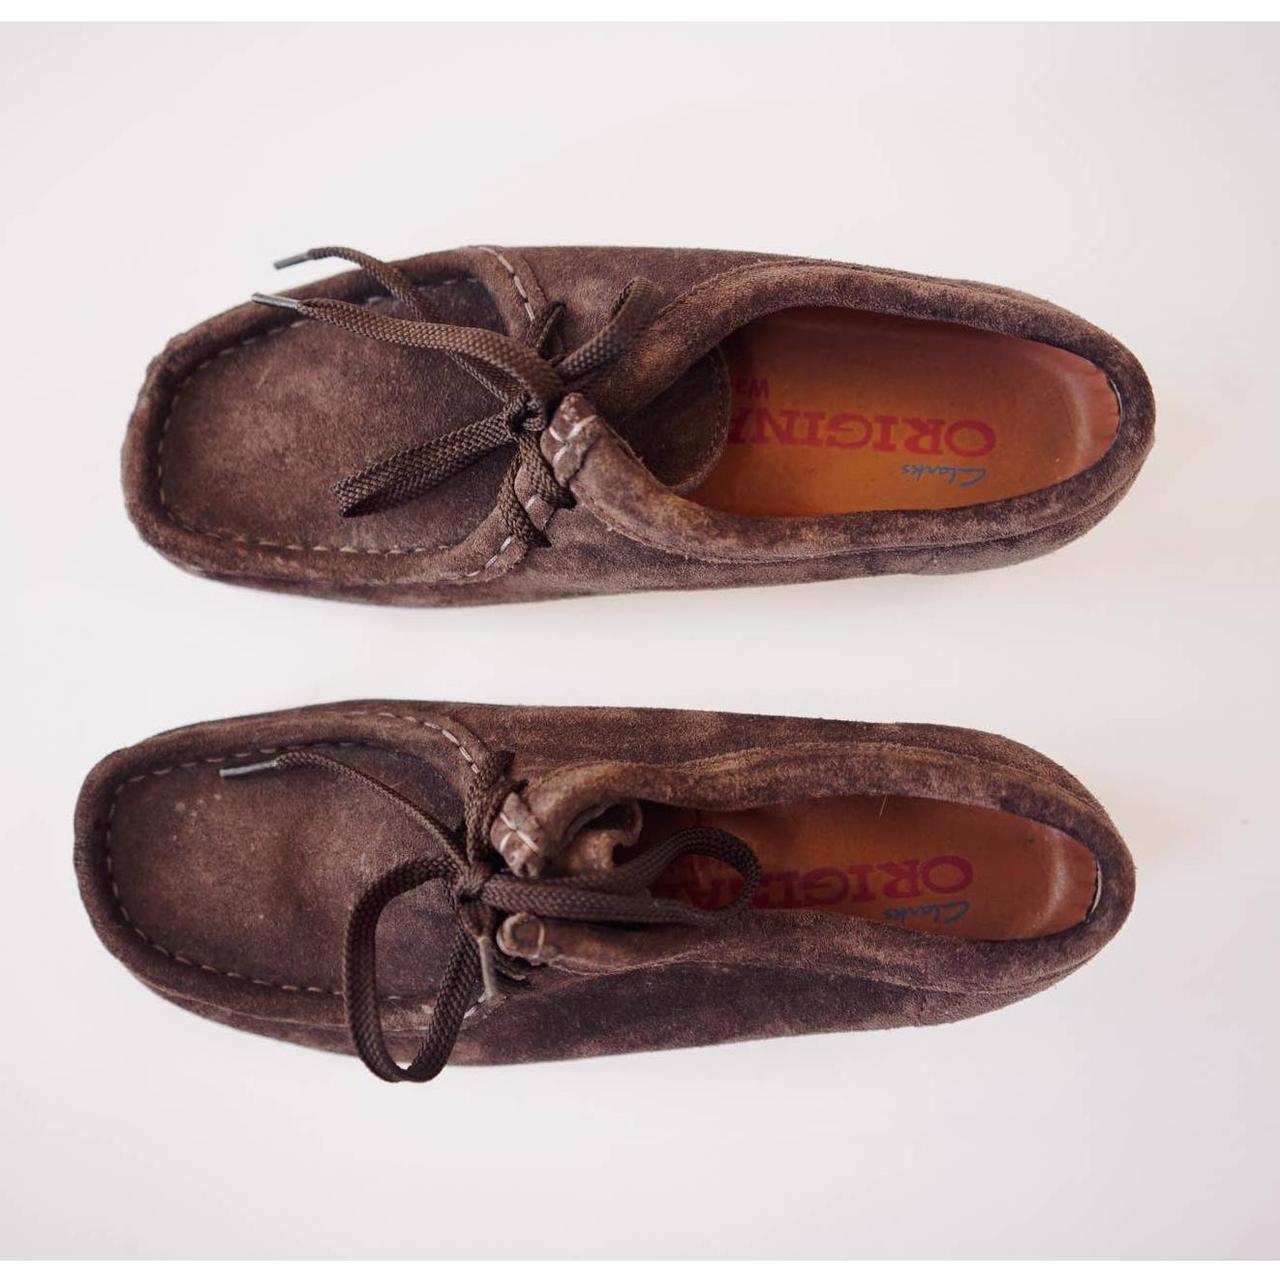 Product Image 2 - Clarks Wallabees brown suede, low